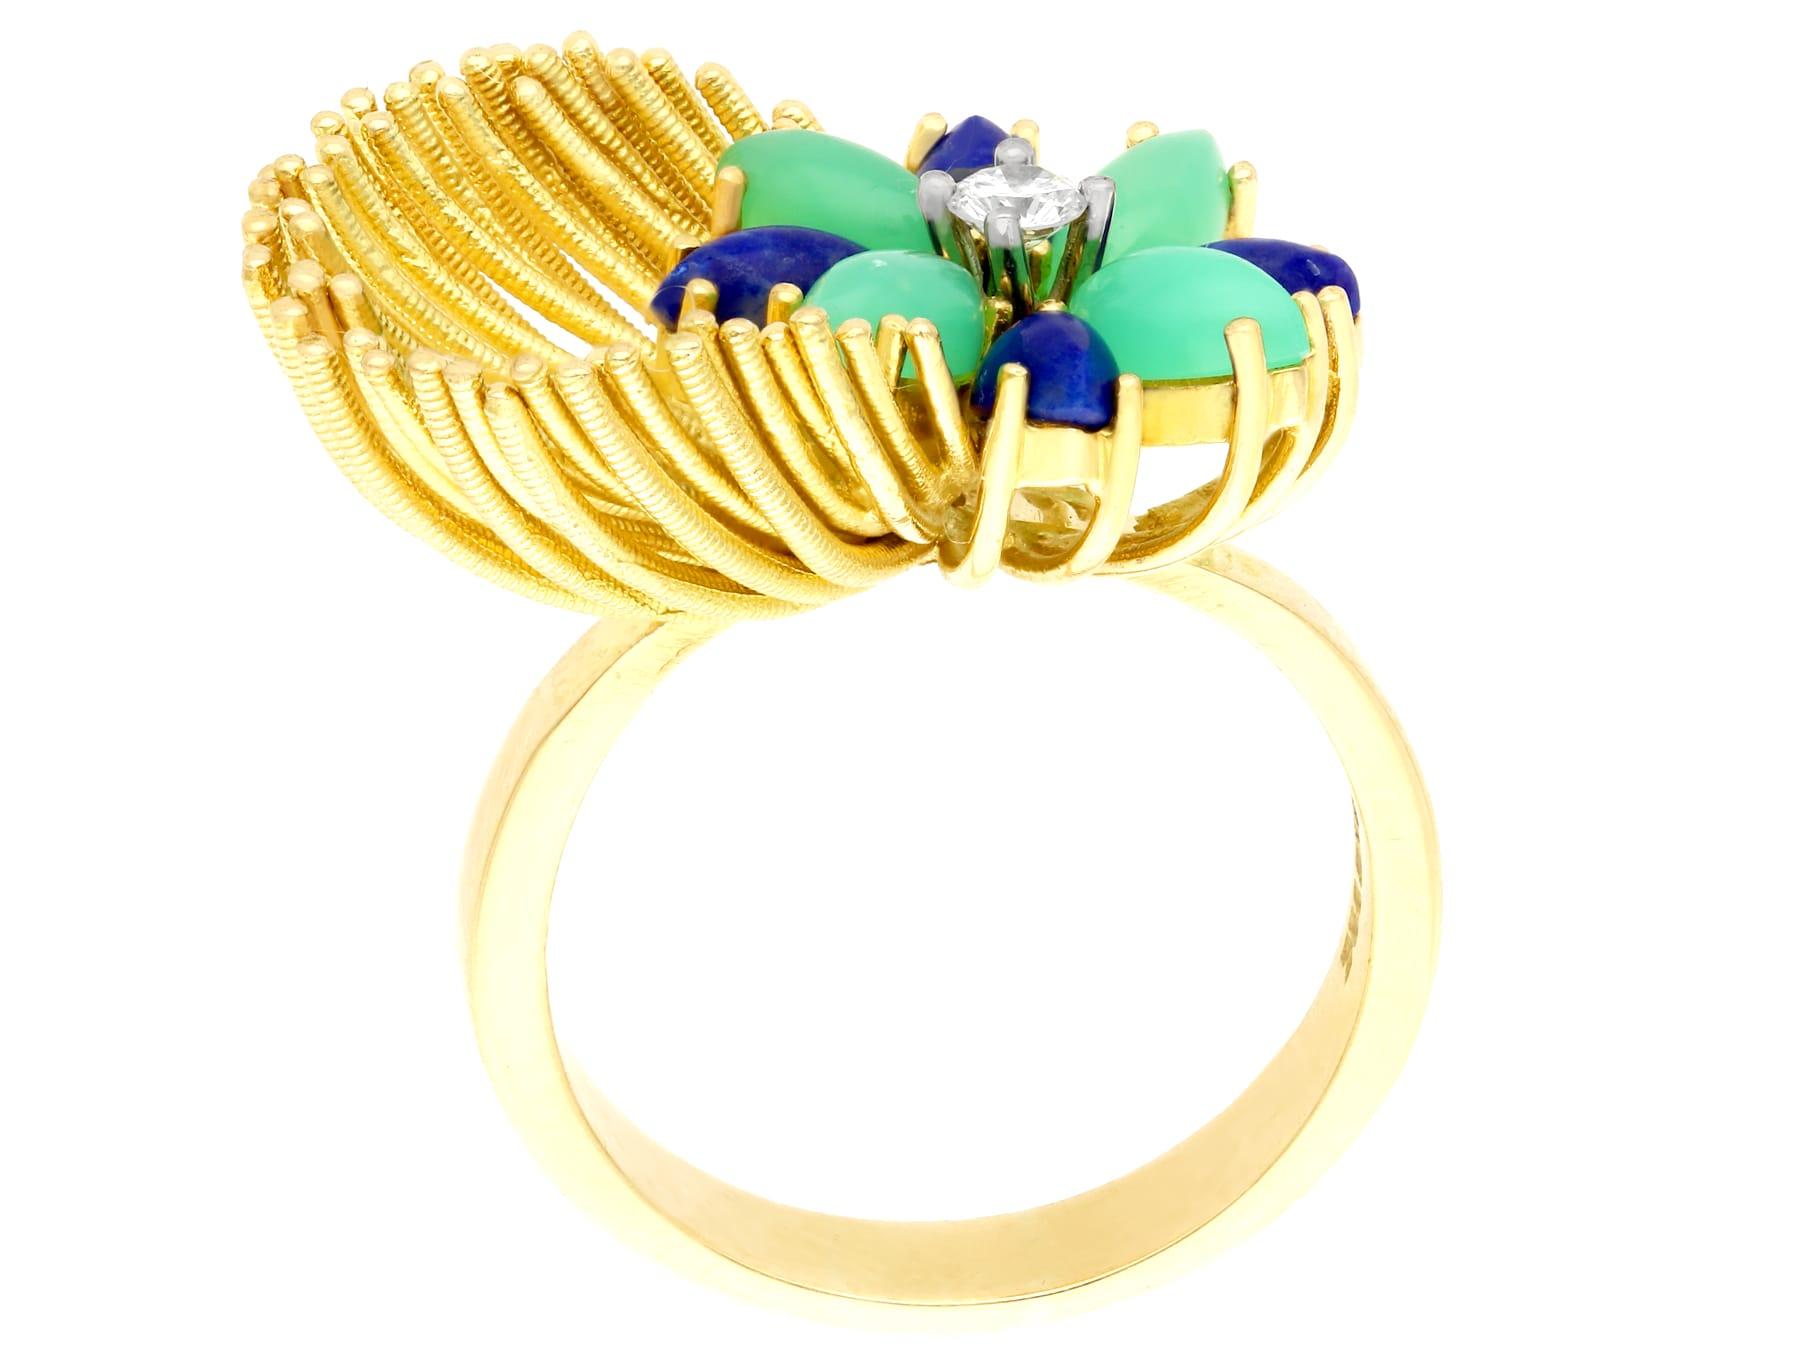 Chrysoprase and Sodalite Diamond and Yellow Gold Cocktail Ring In Excellent Condition For Sale In Jesmond, Newcastle Upon Tyne